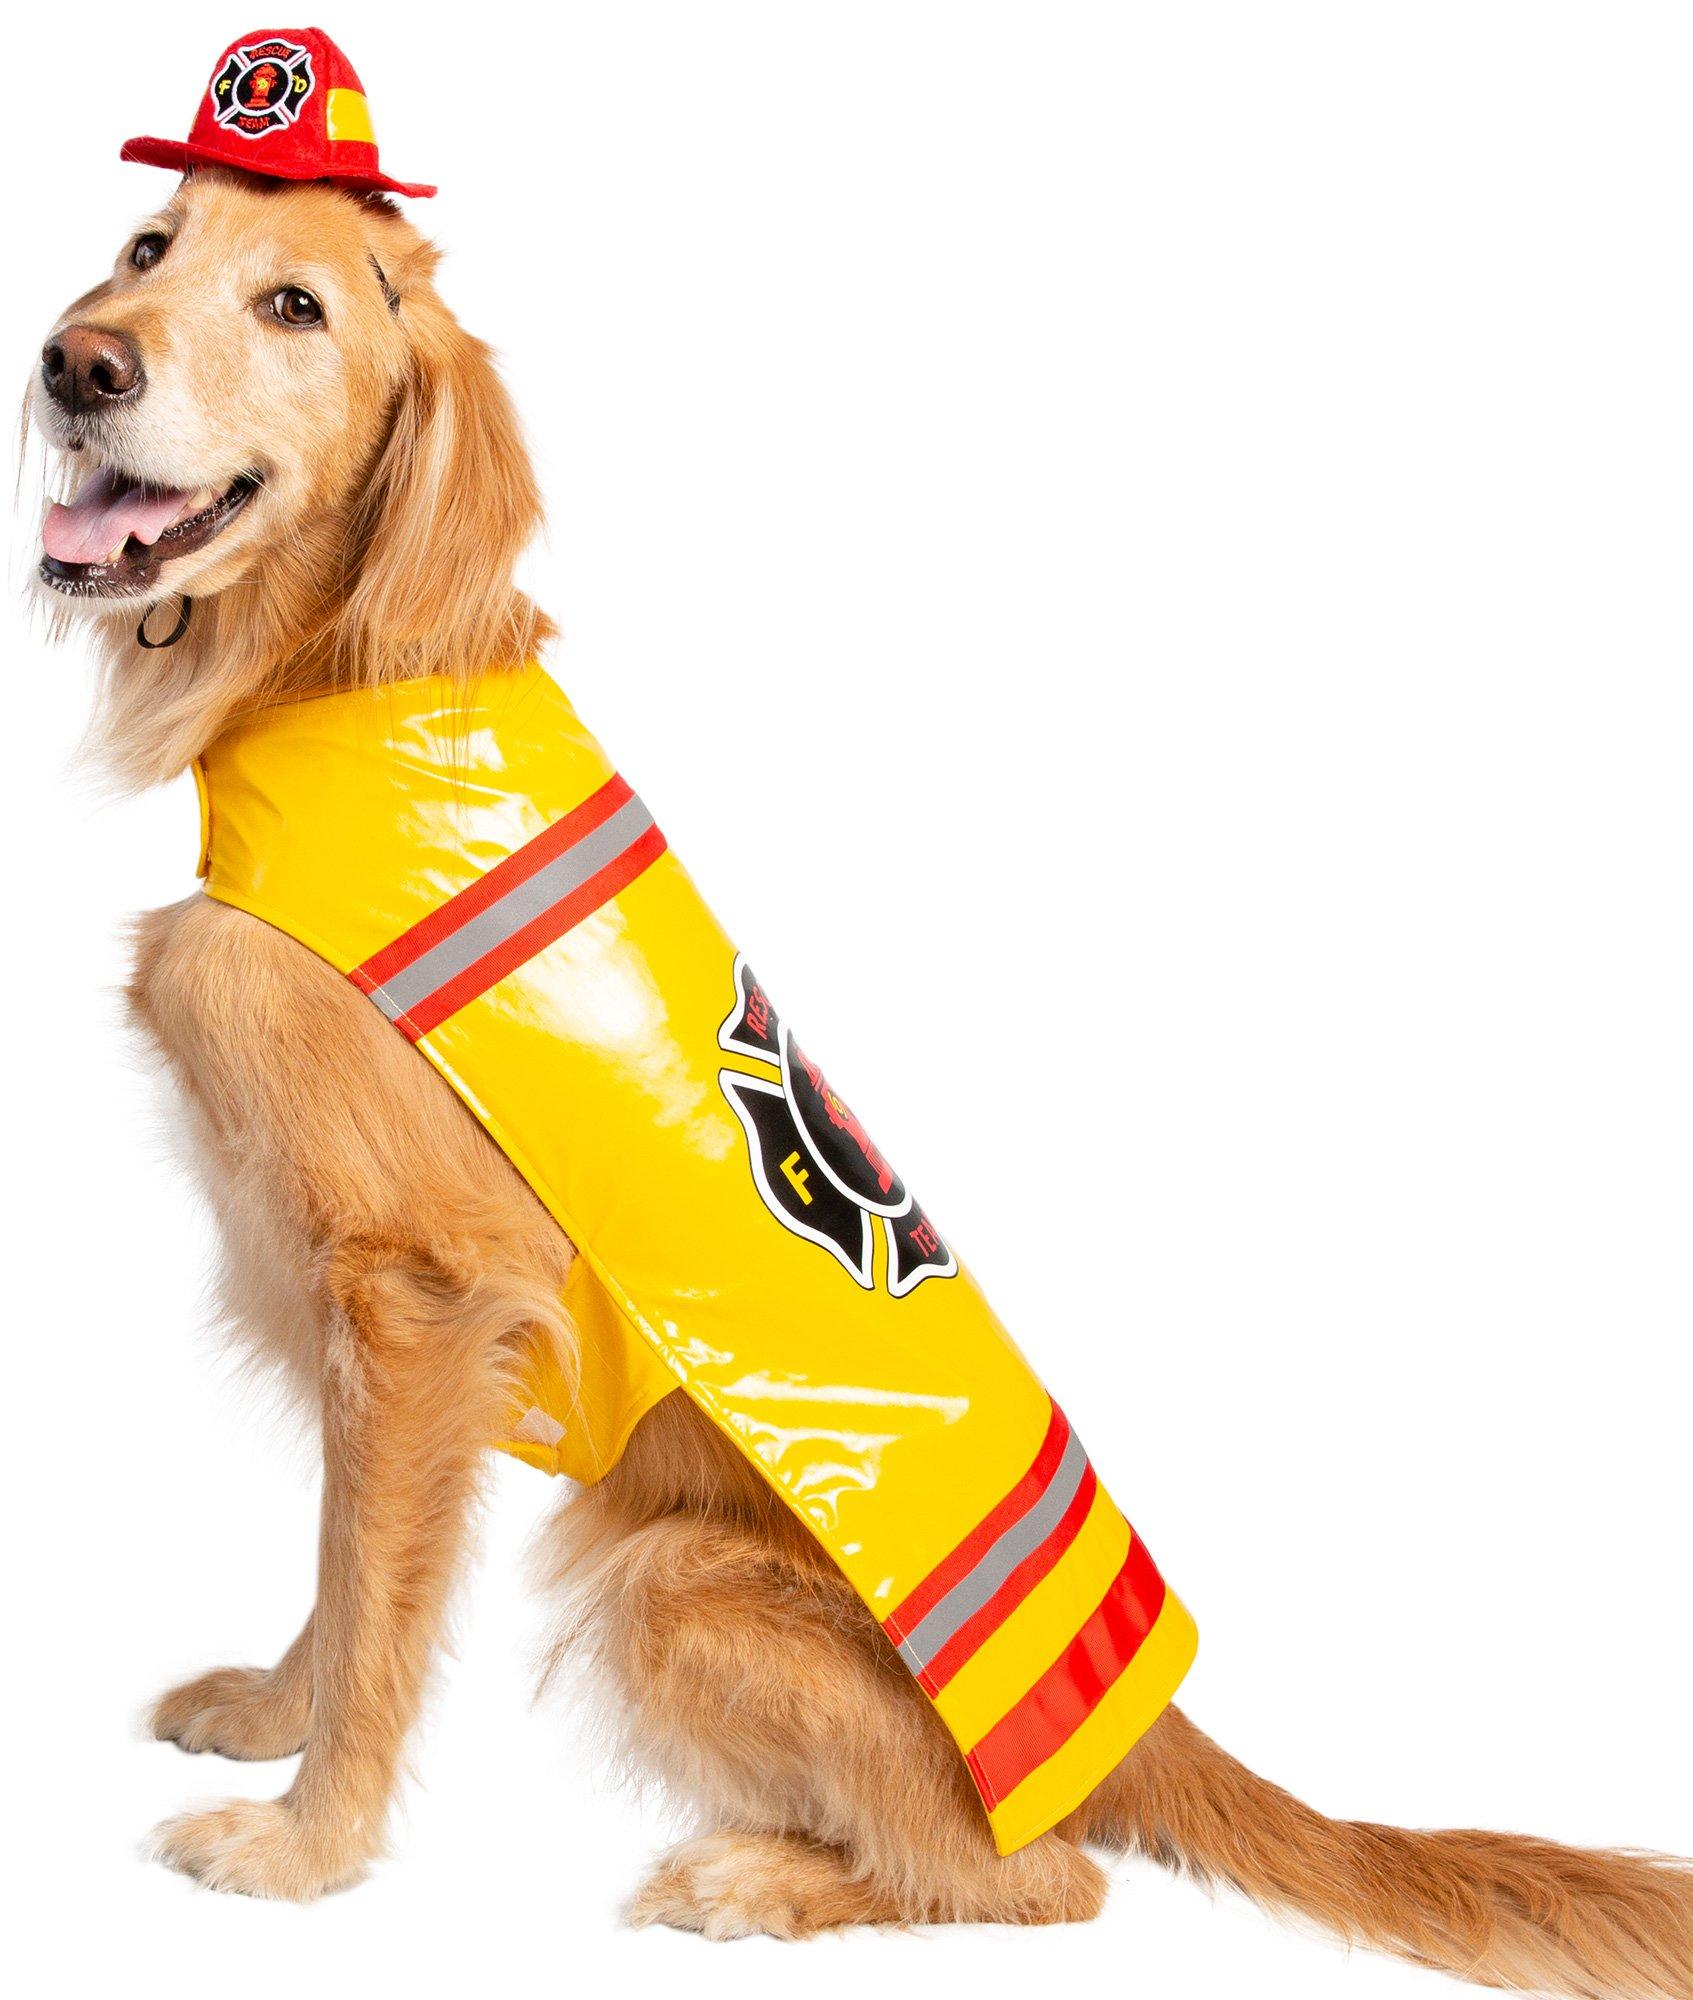 Firefighter Dog Costume | Party City